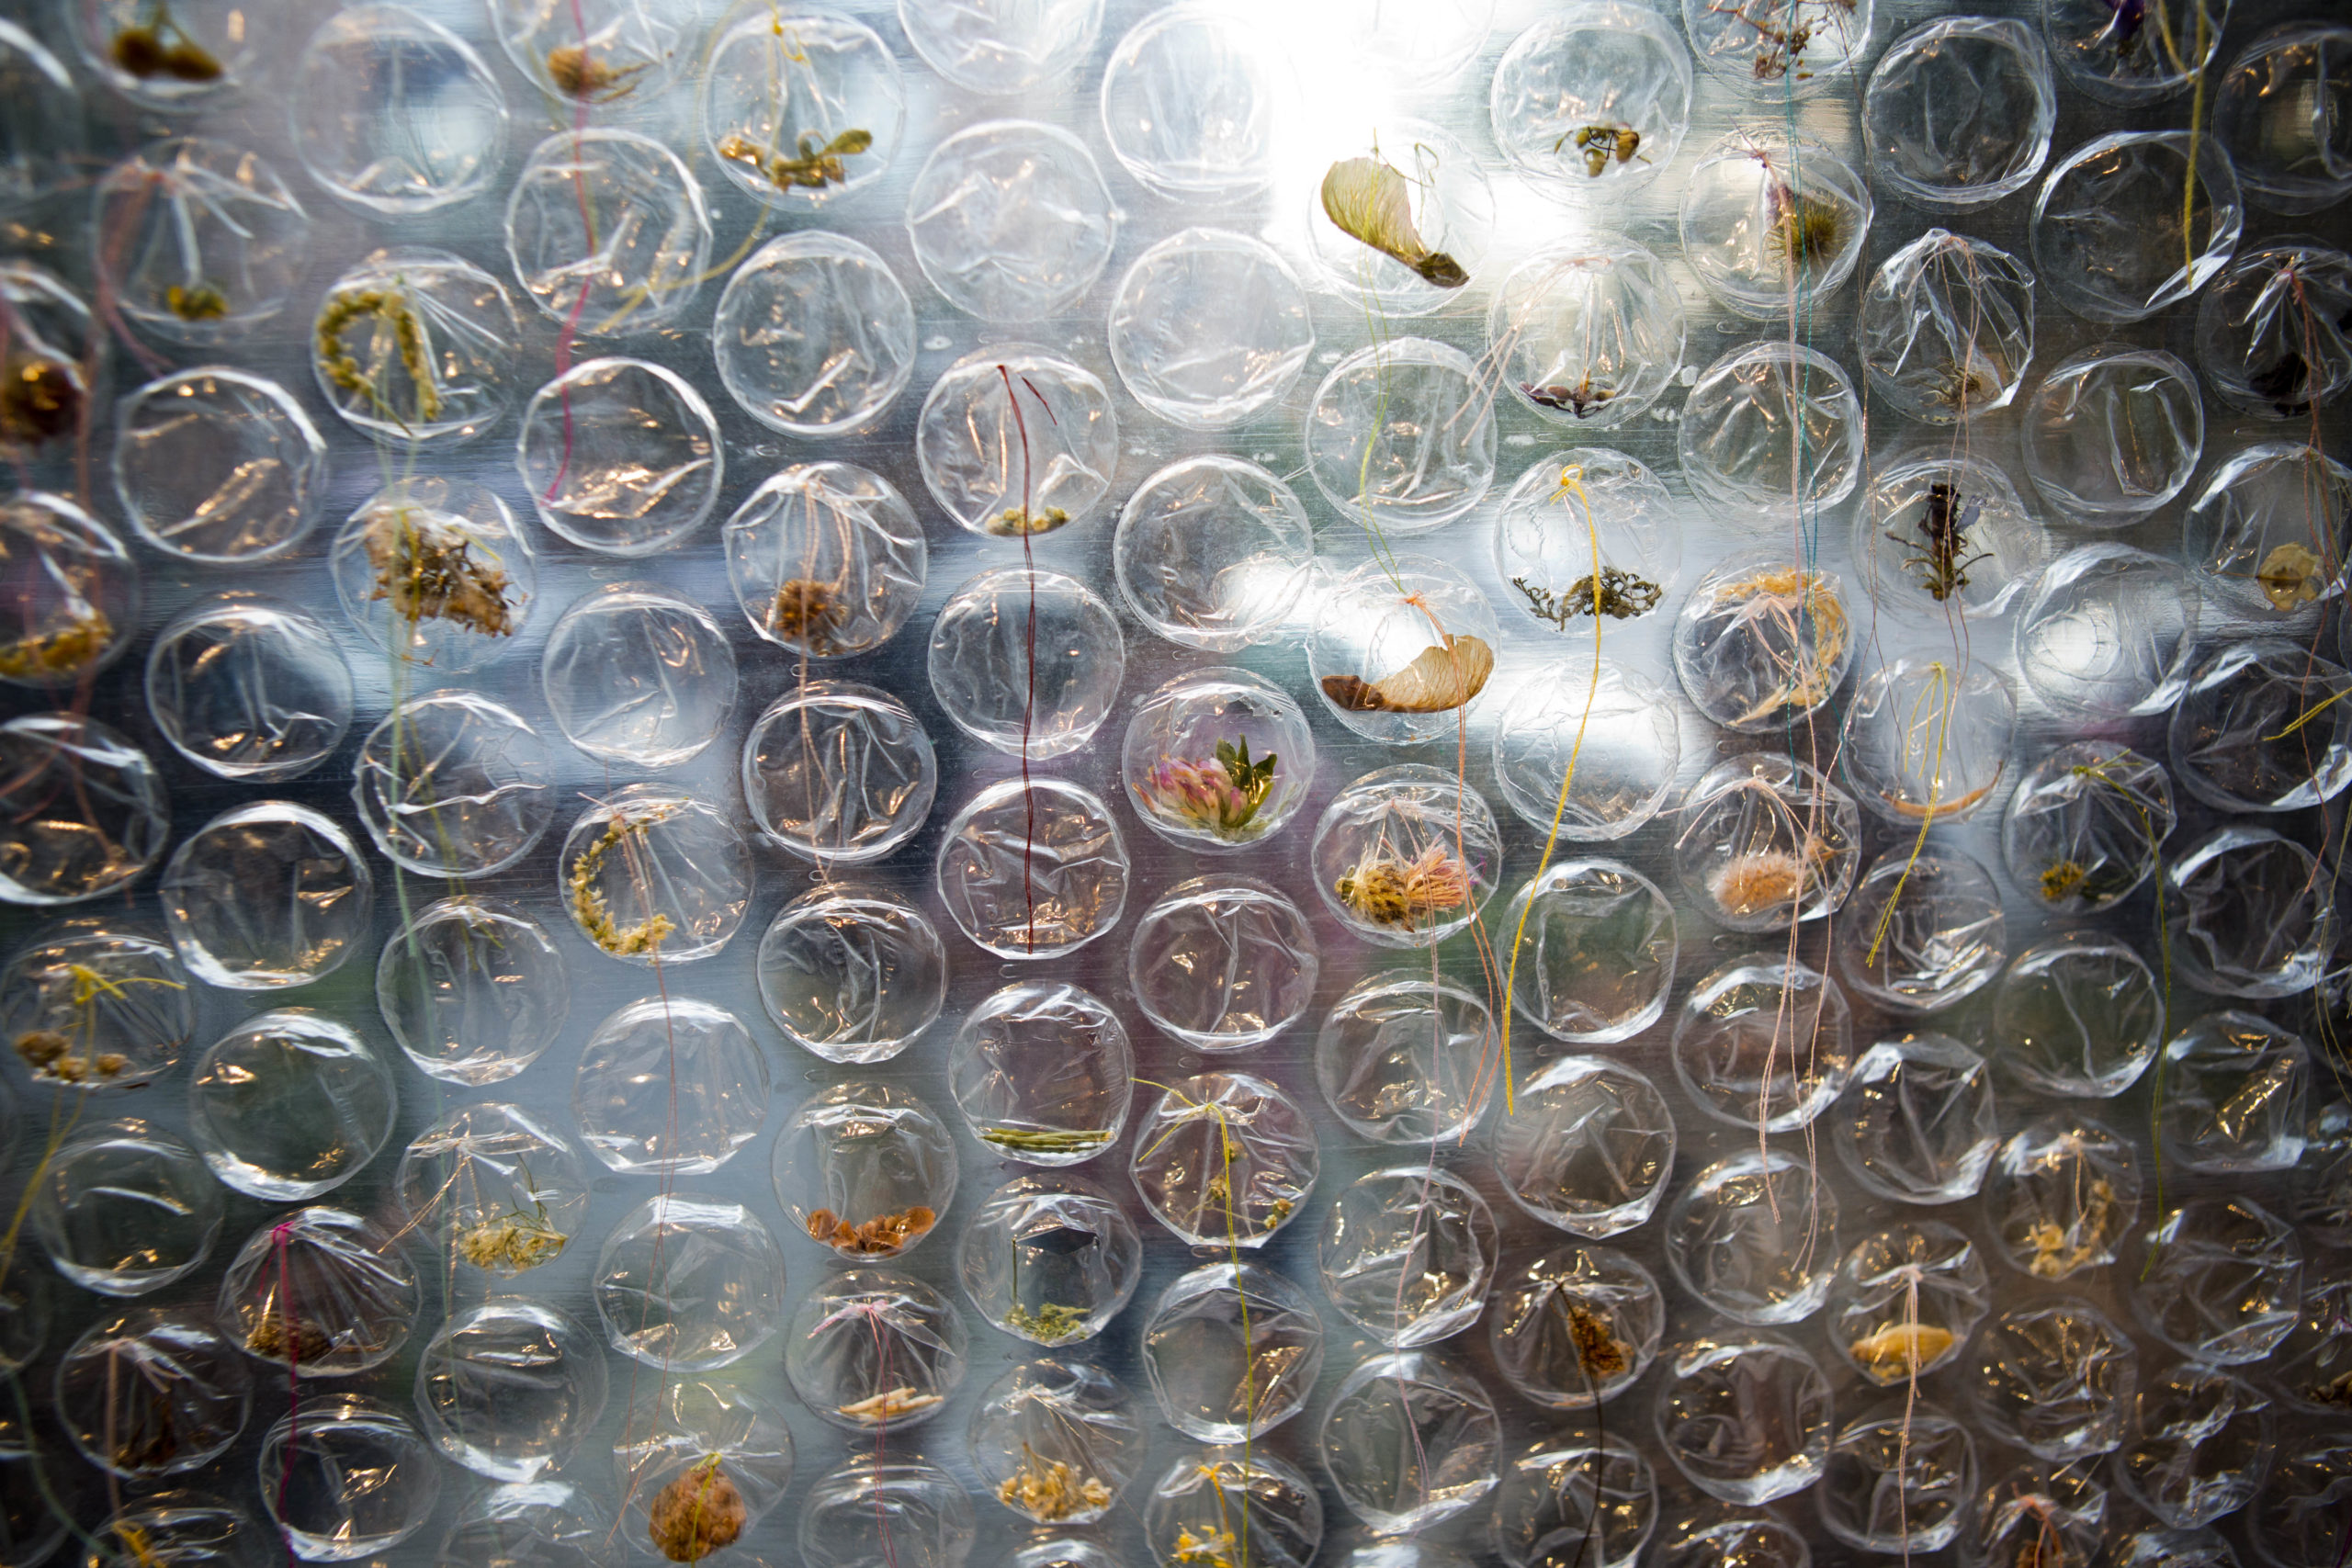 upclose image of a bubble wrap with plant remnants and thread inside each bubble, and a faint abstract image in the back